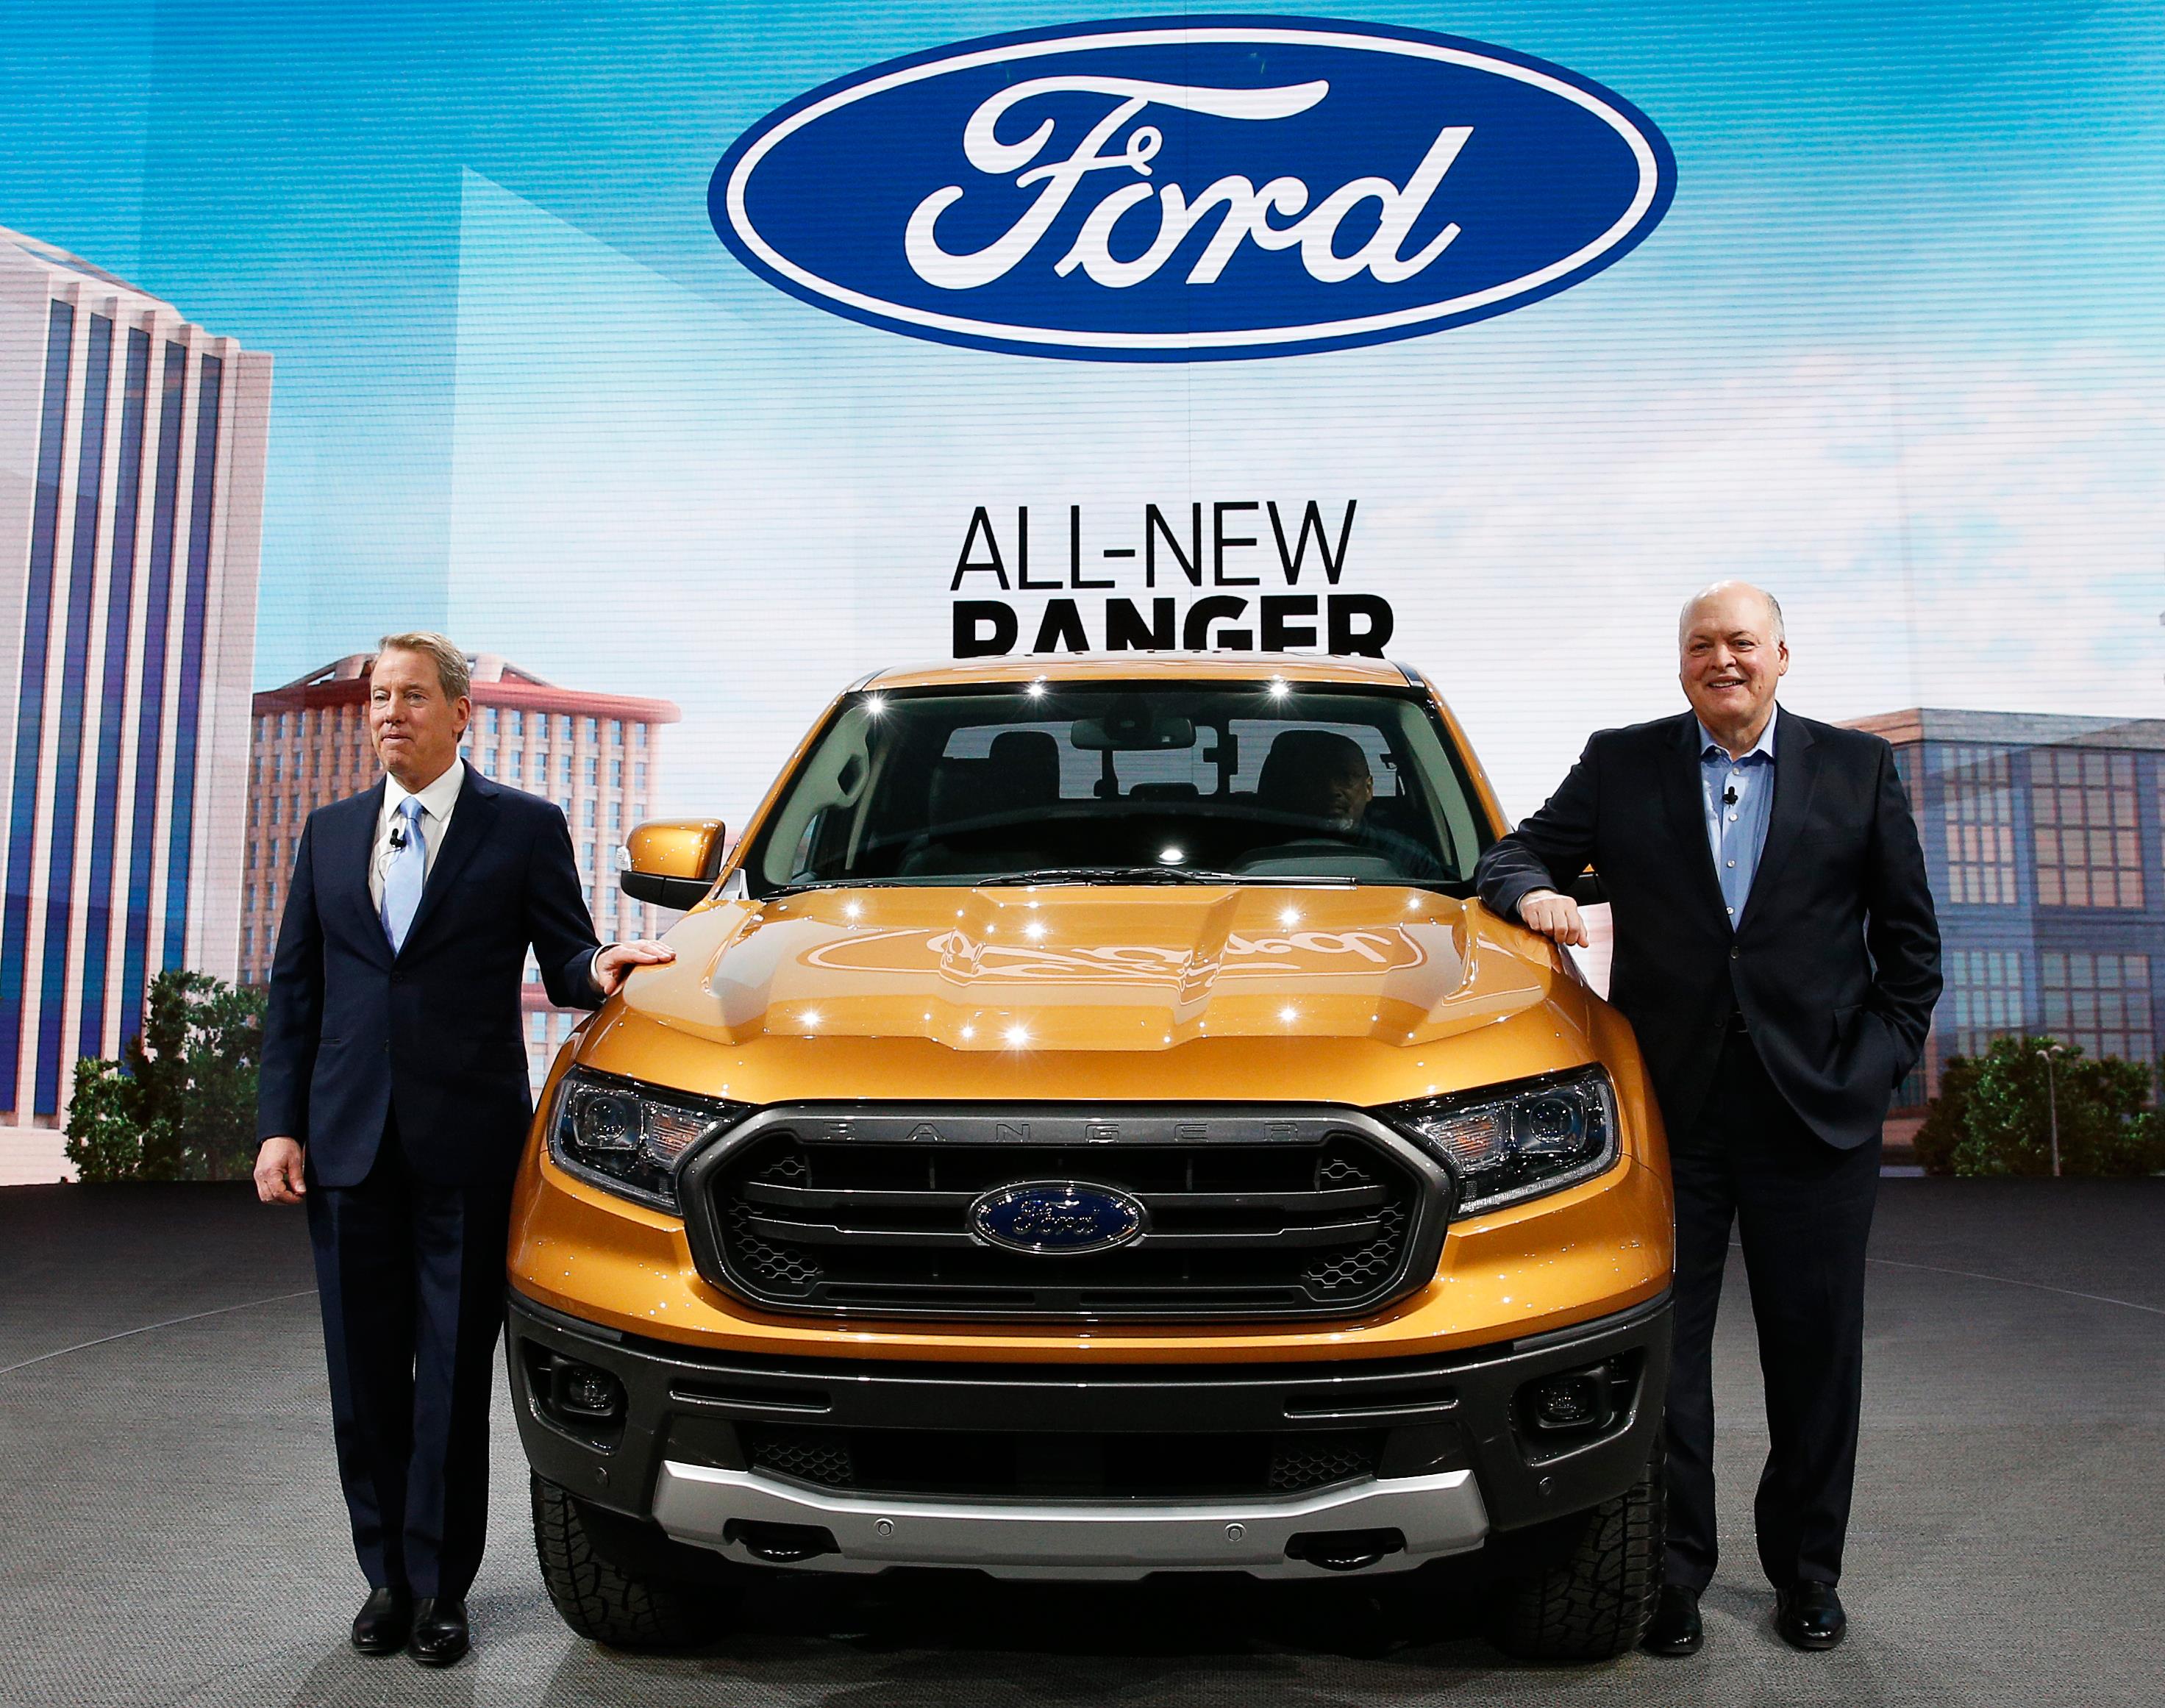 Ford plans $11 billion investment, 40 electrified vehicles by 2022 ...